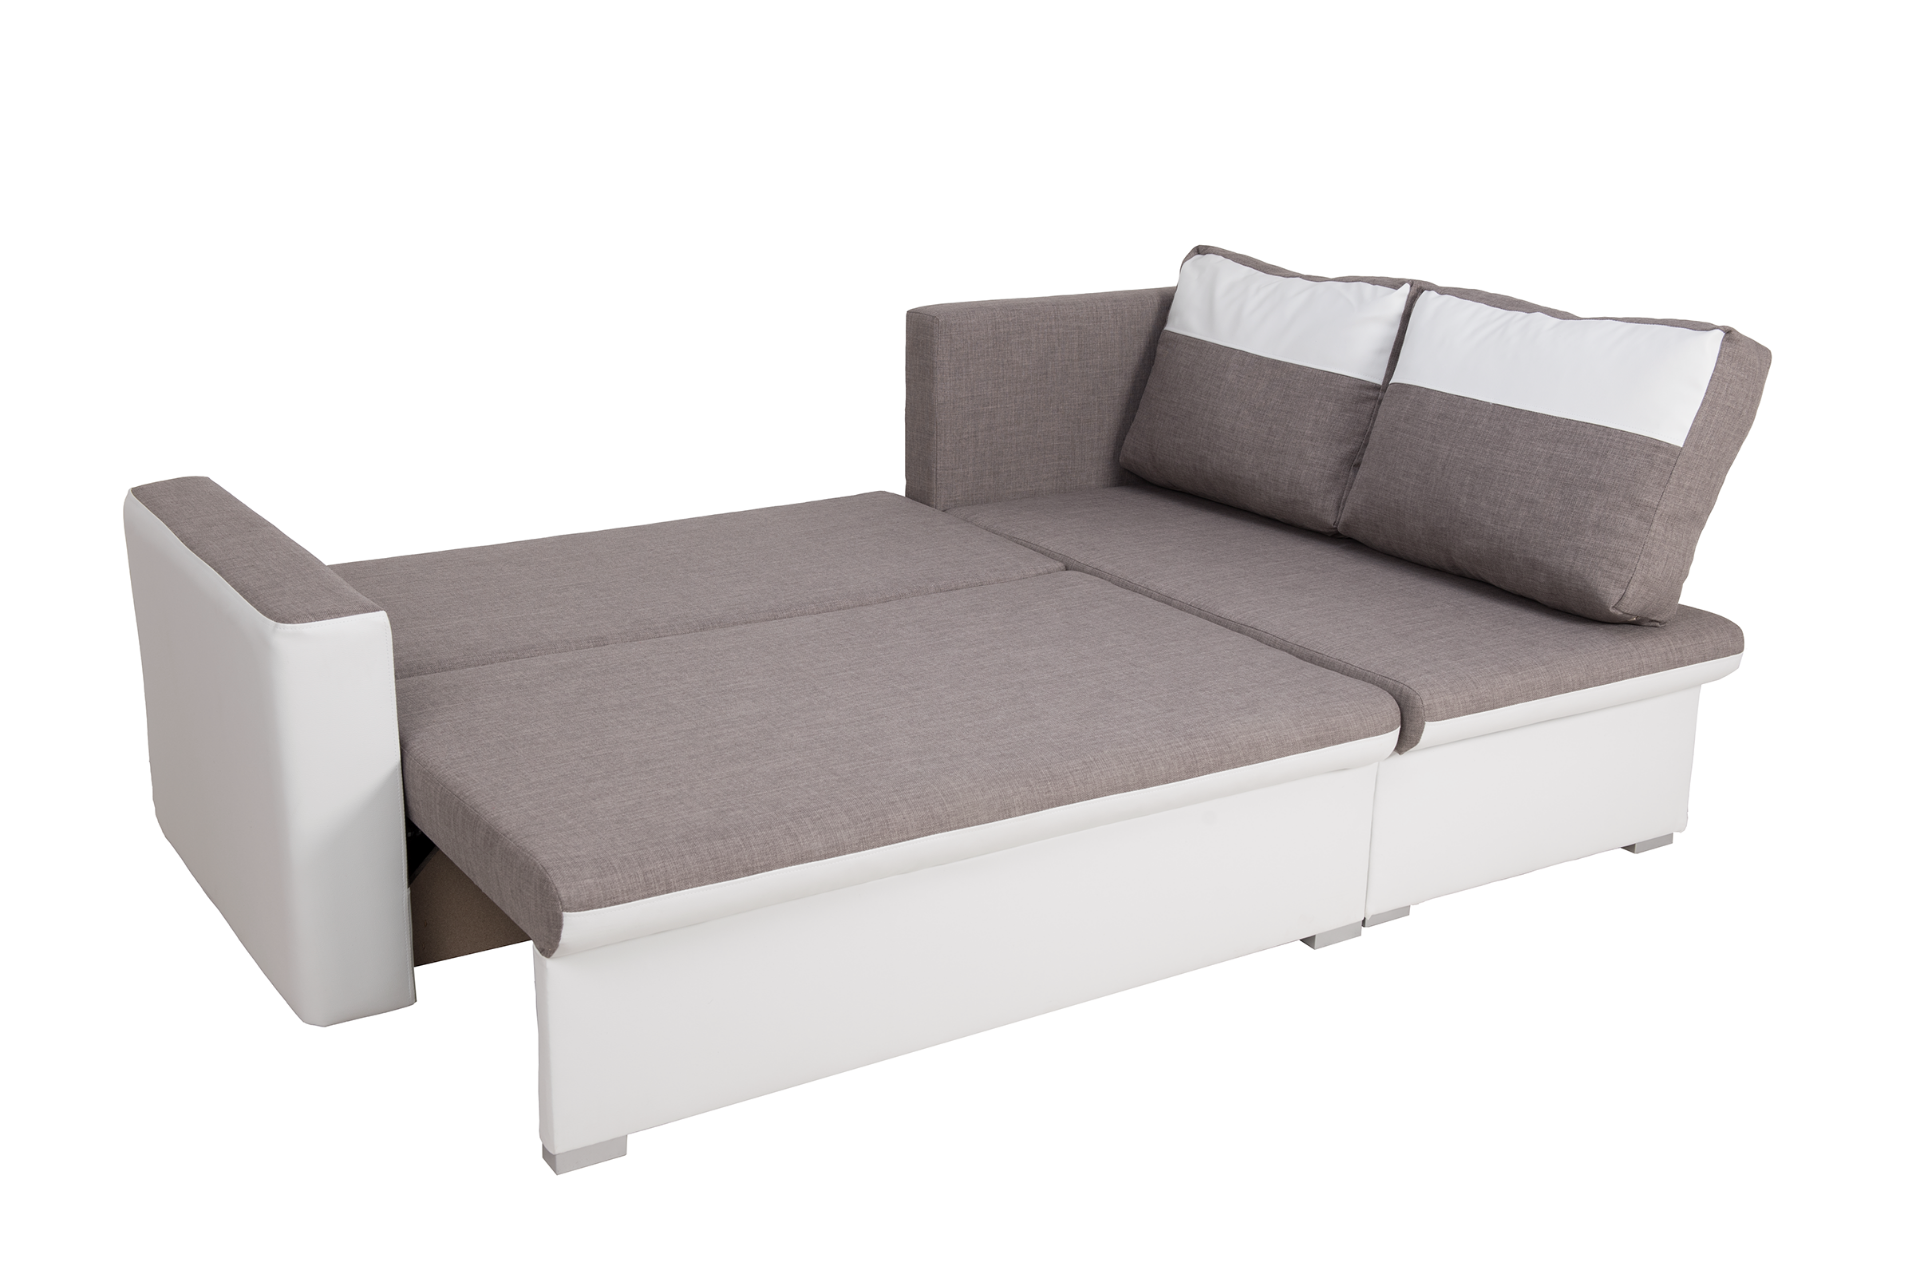 Flàvio corner sofa bed right hand facing in white and grey faux leather - Image 2 of 2